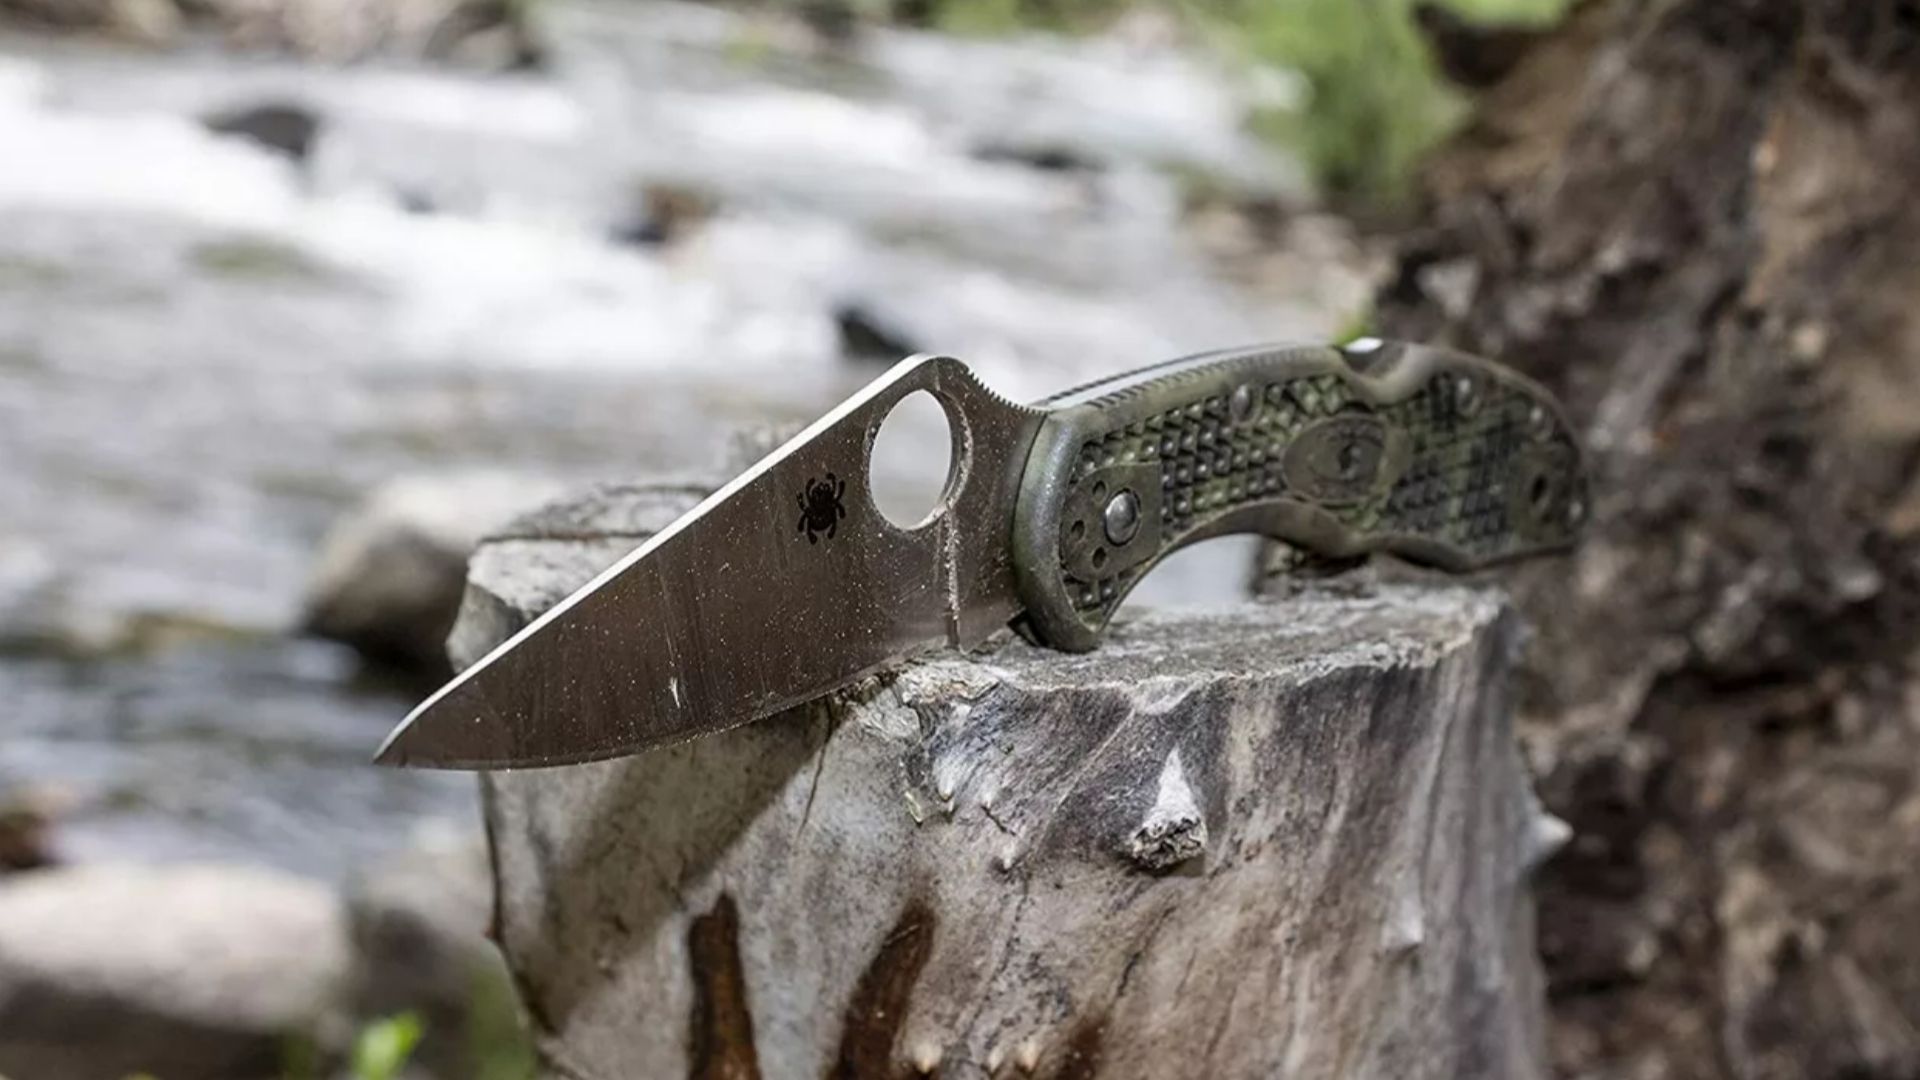 A Knife Nerd's Guide to Pocketknives for Regular People